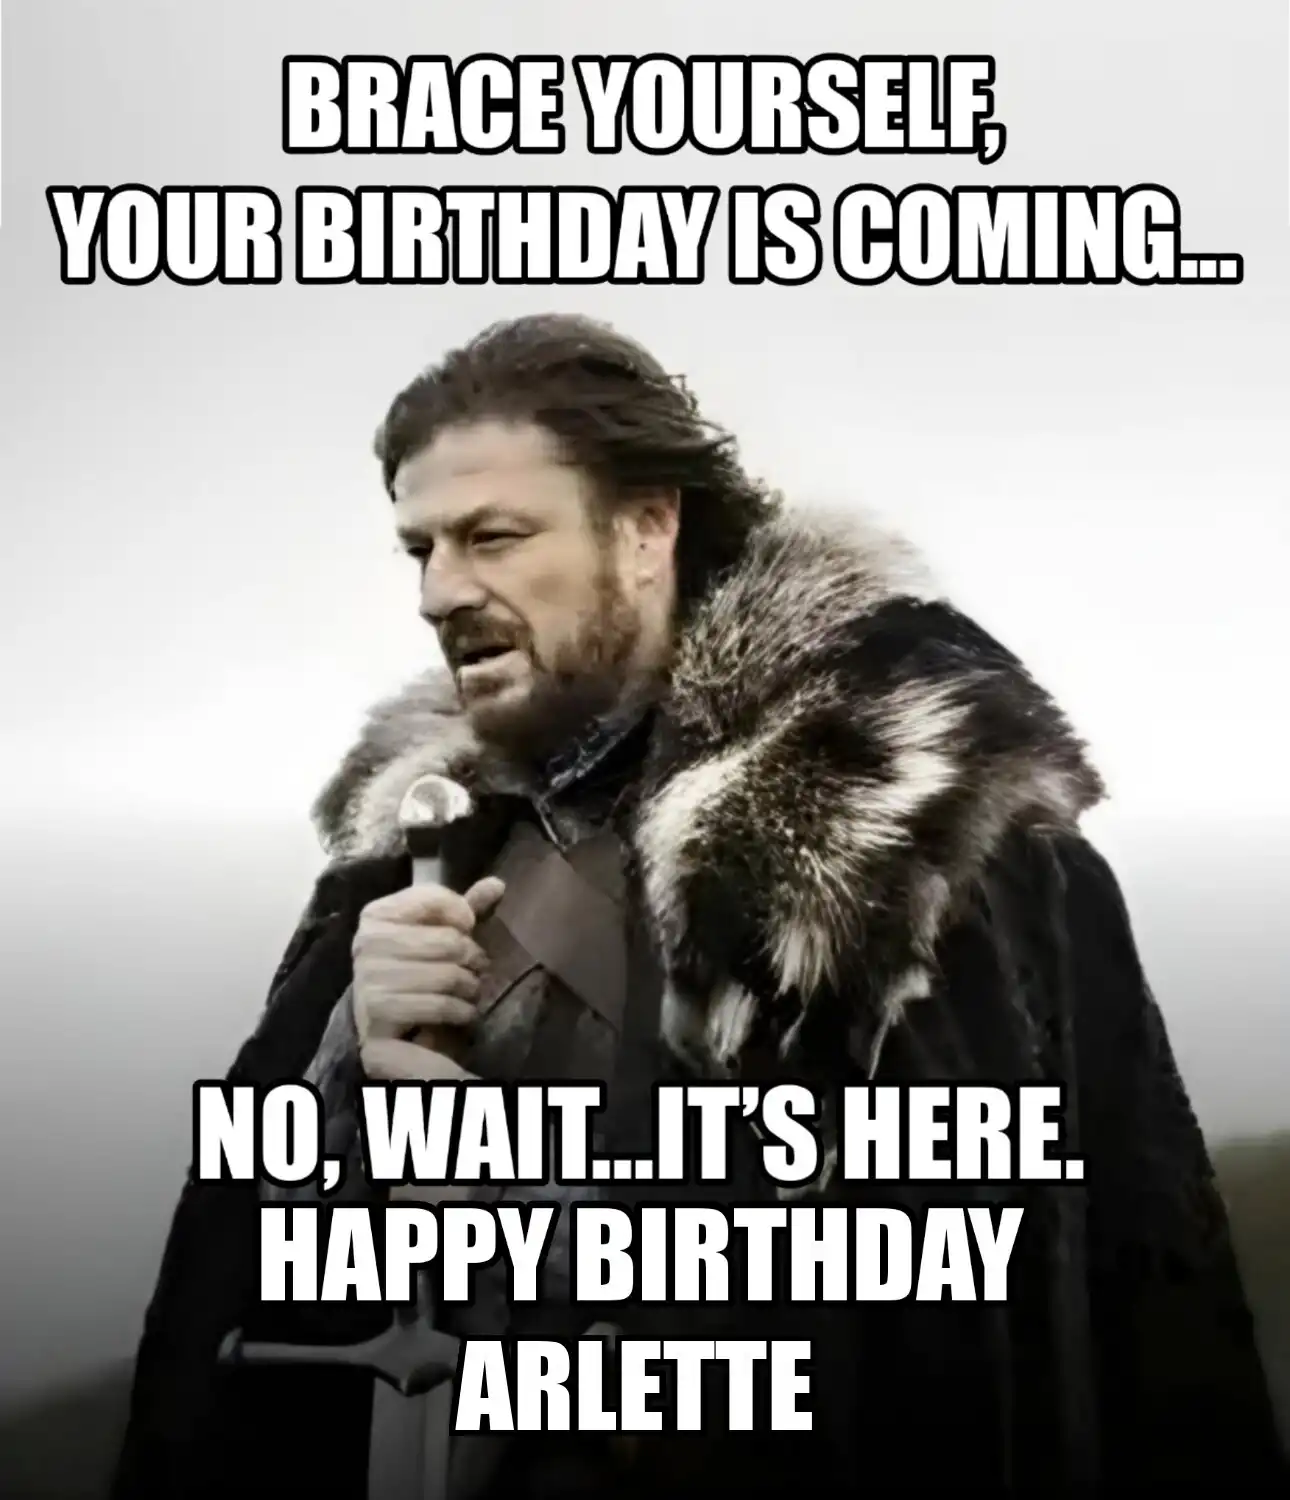 Happy Birthday Arlette Brace Yourself Your Birthday Is Coming Meme